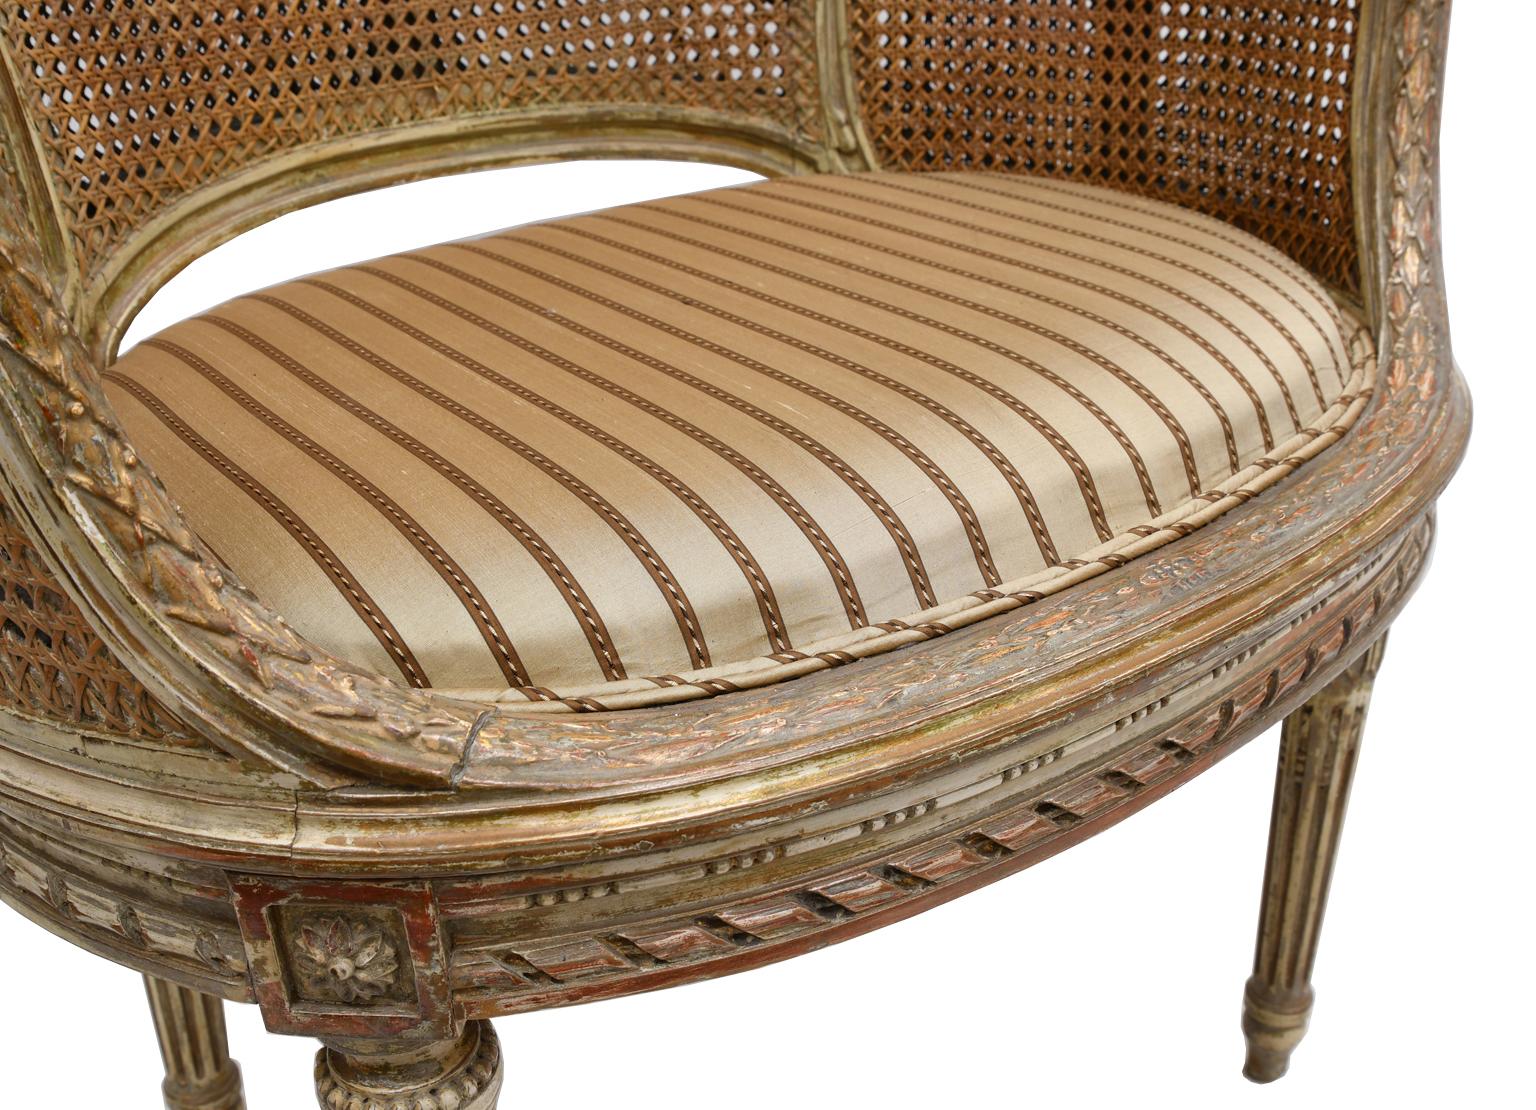 Antique French Louis XVI Style Polychrome and Gilt Barrel Desk Chair with Caning 9